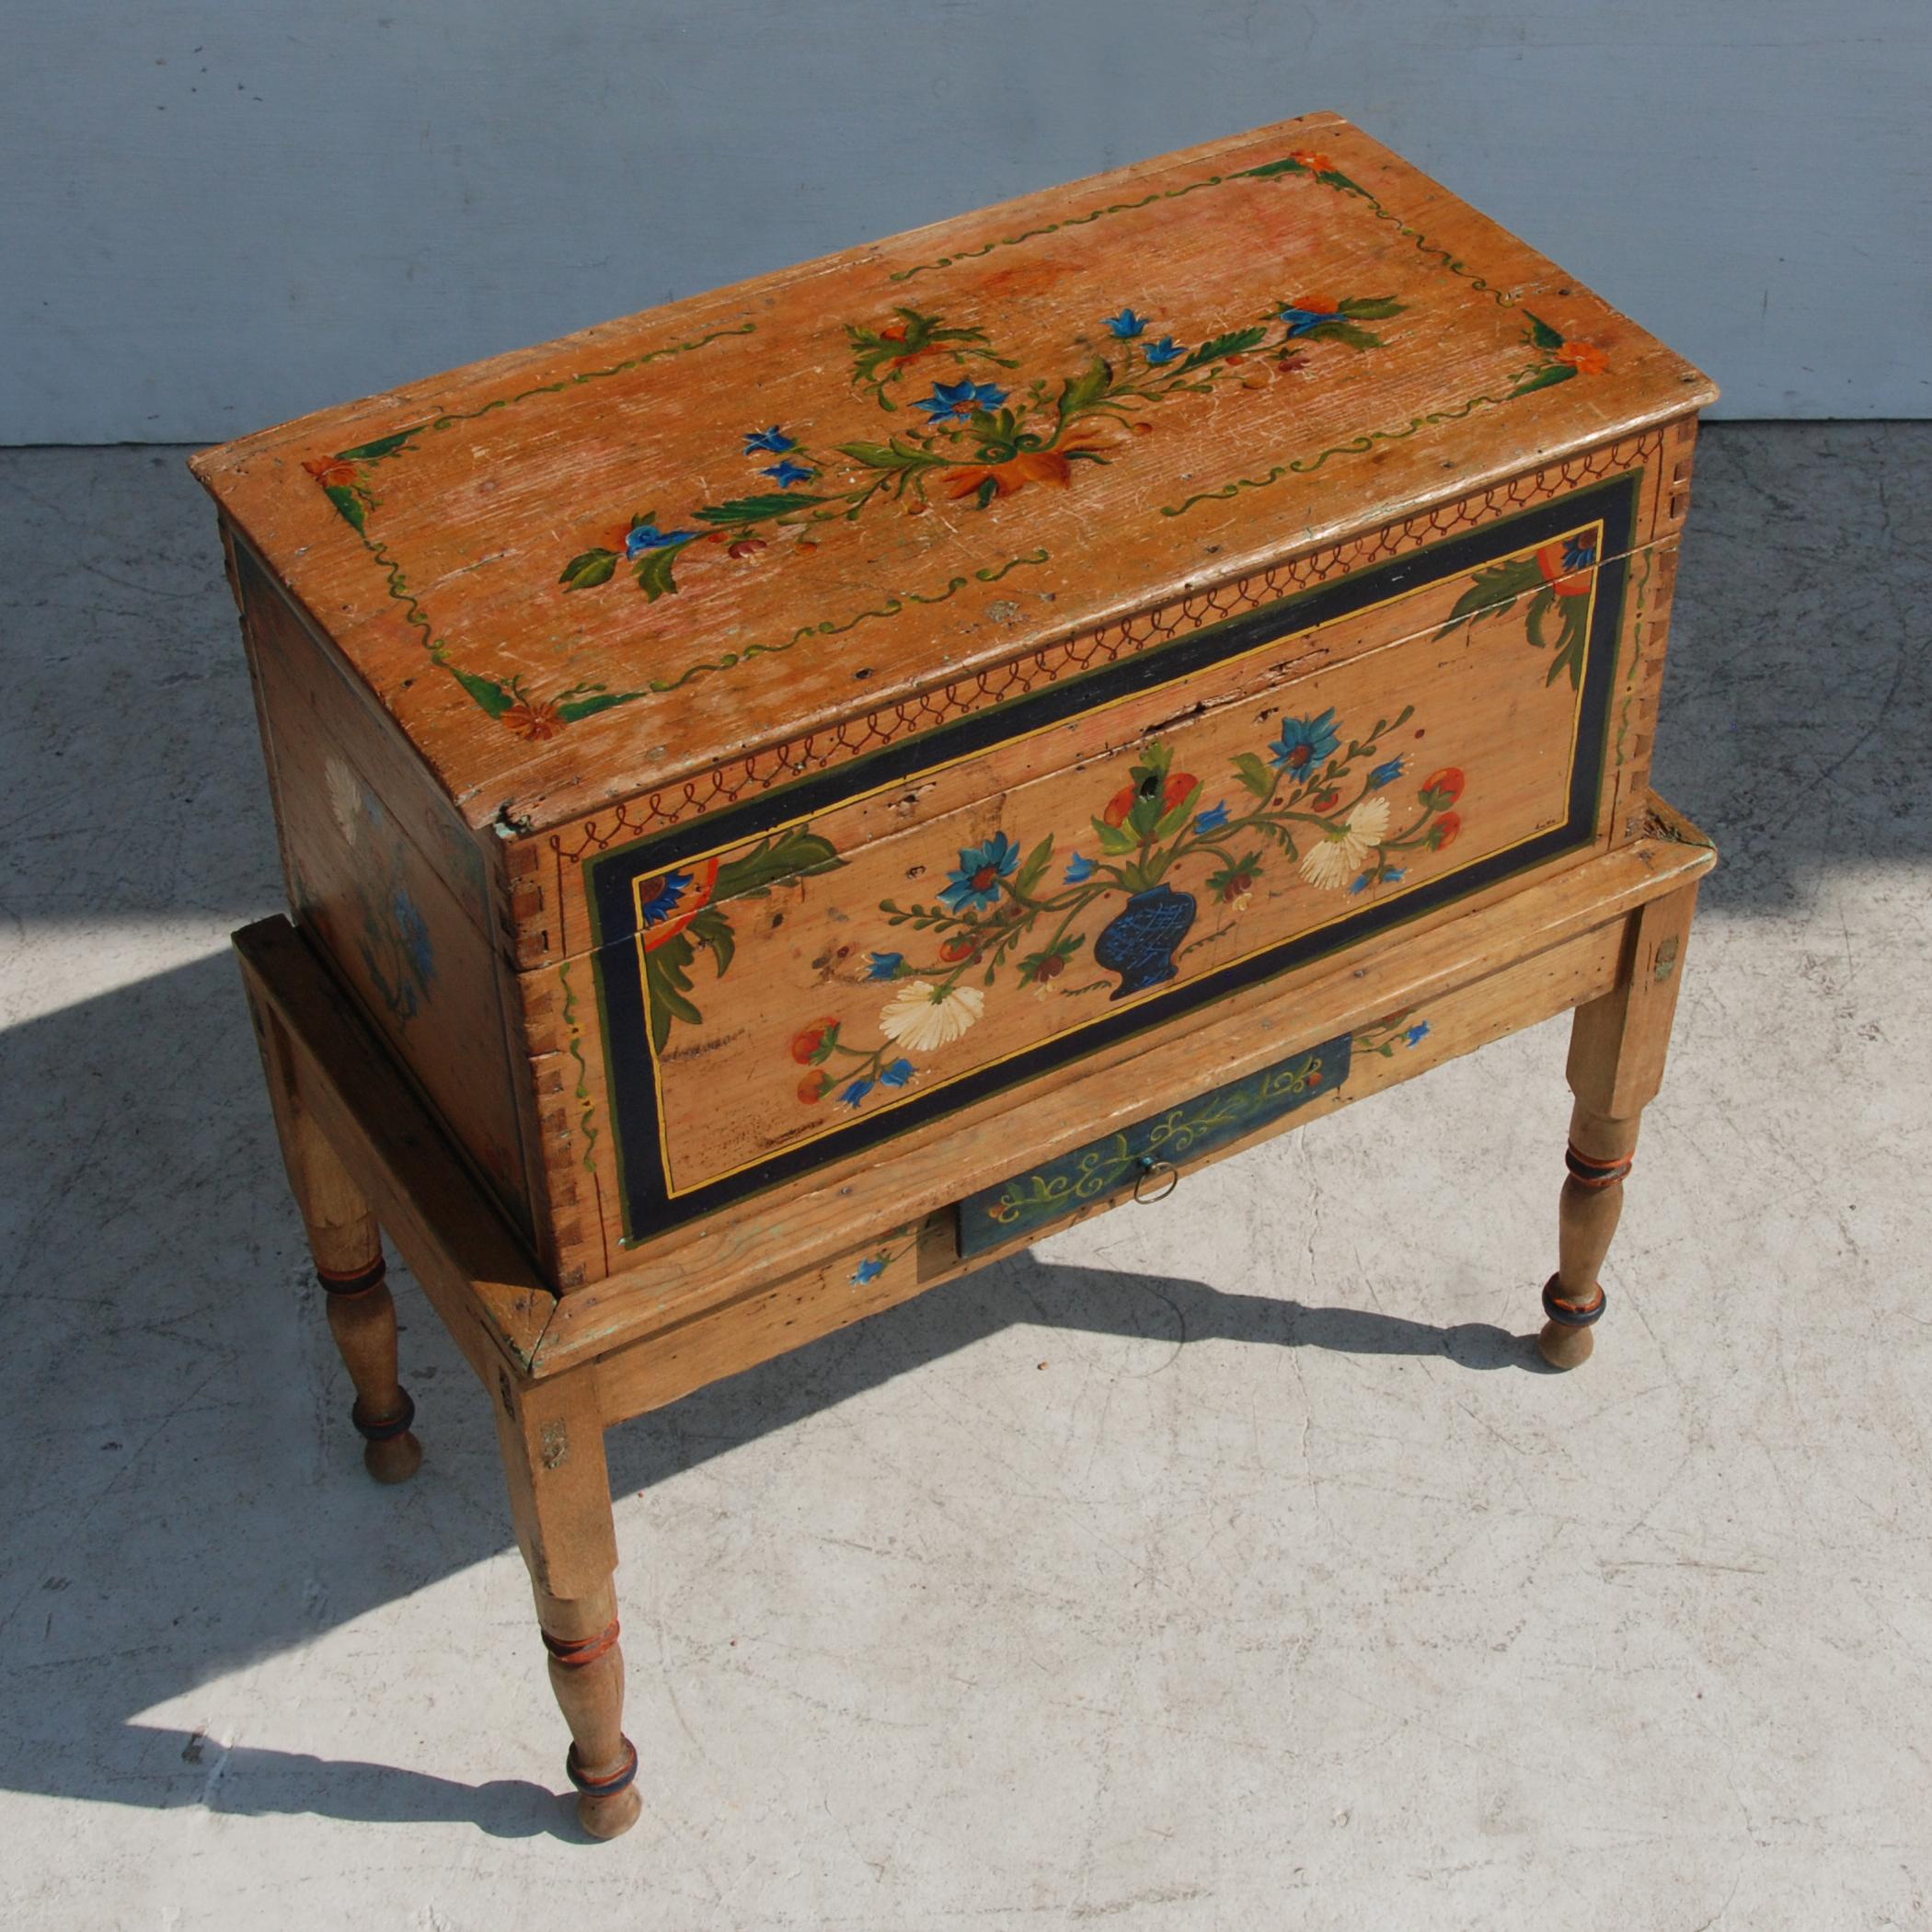 20th Century Antique, Hand Painted Mexican Wedding or Hope Chest on Stand